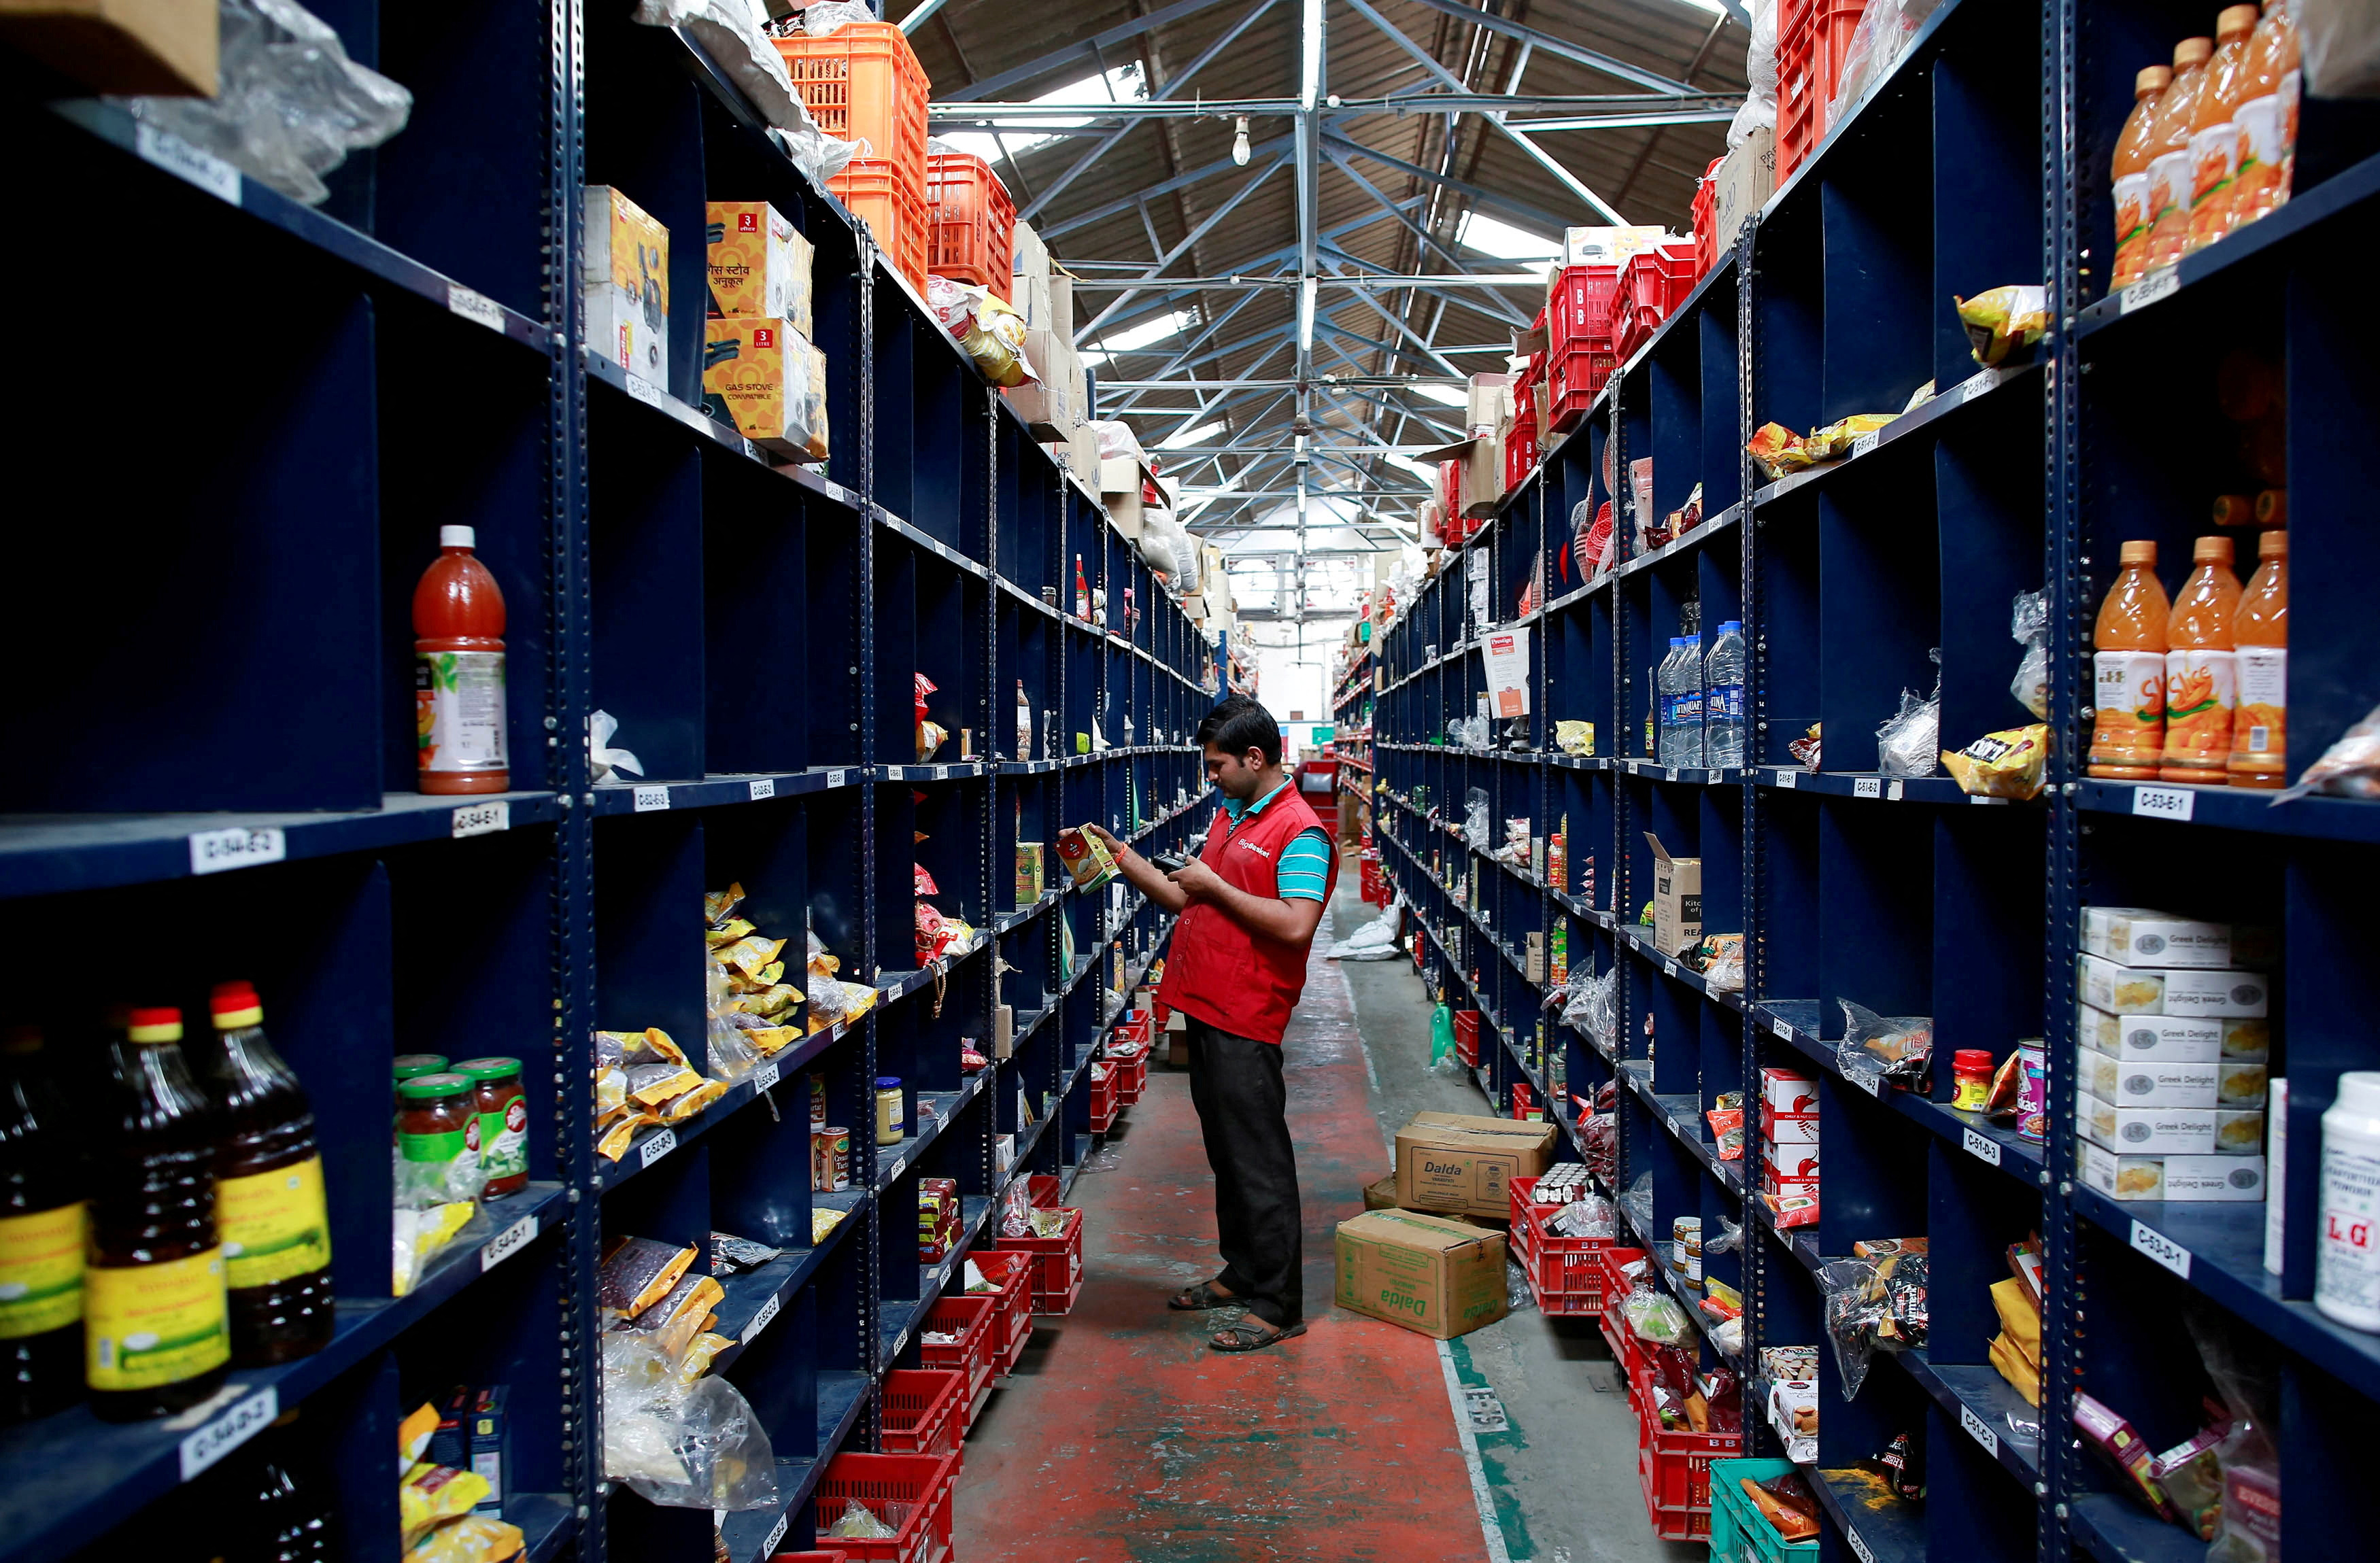 An employee scans a package for an order at a BigBasket warehouse on the outskirts of Mumbai